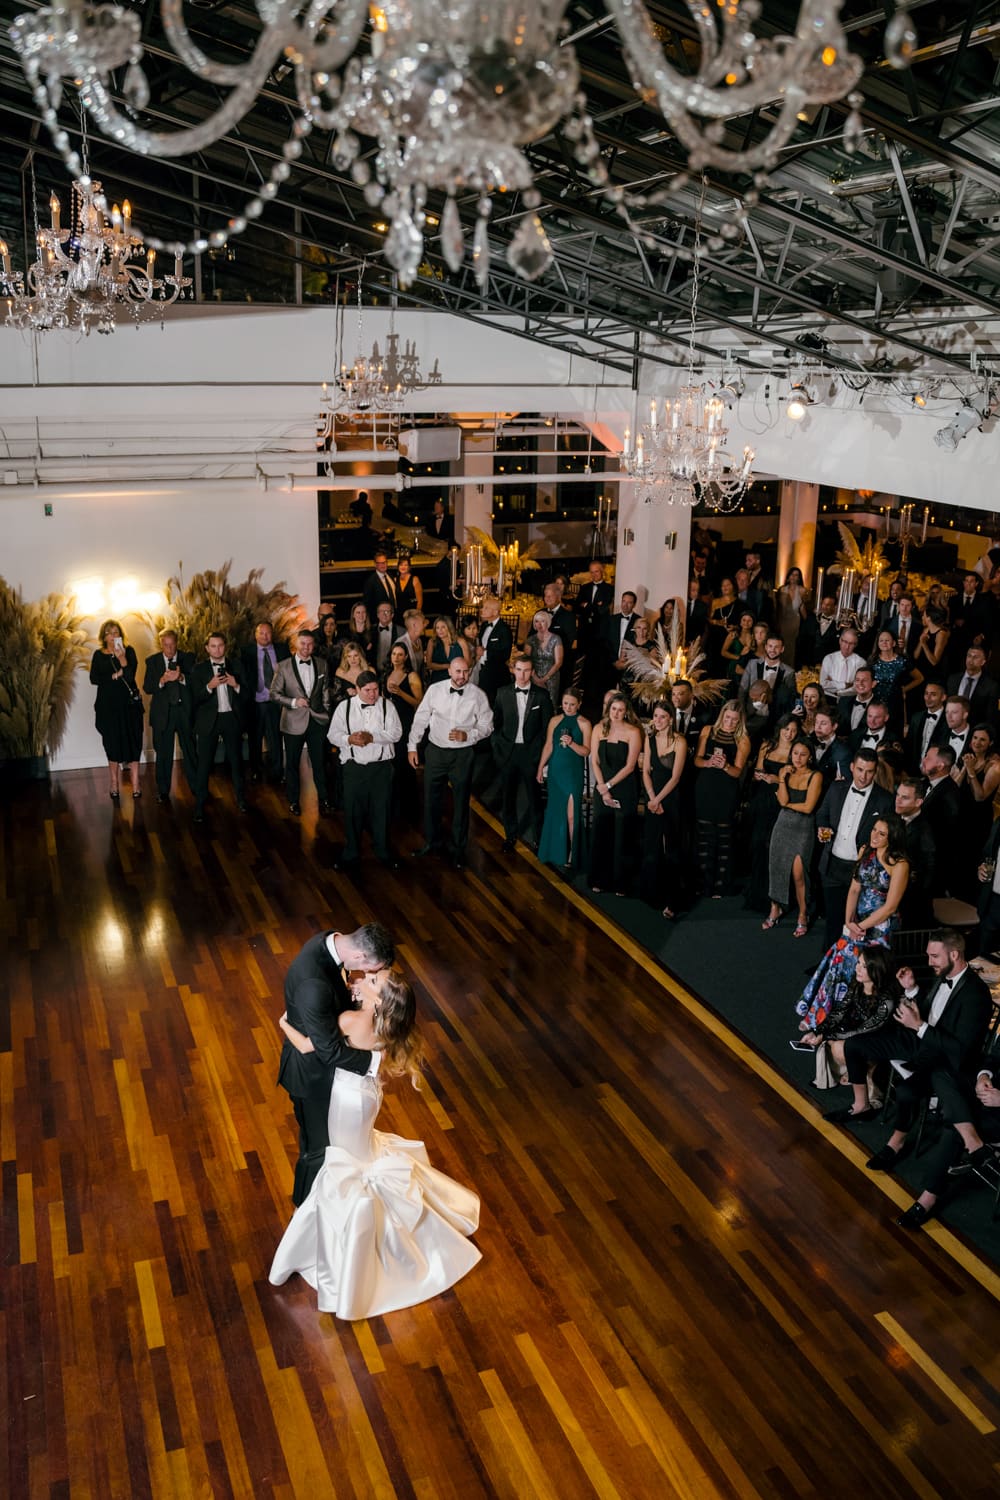 A newly wedded couple's first dance during a wedding reception